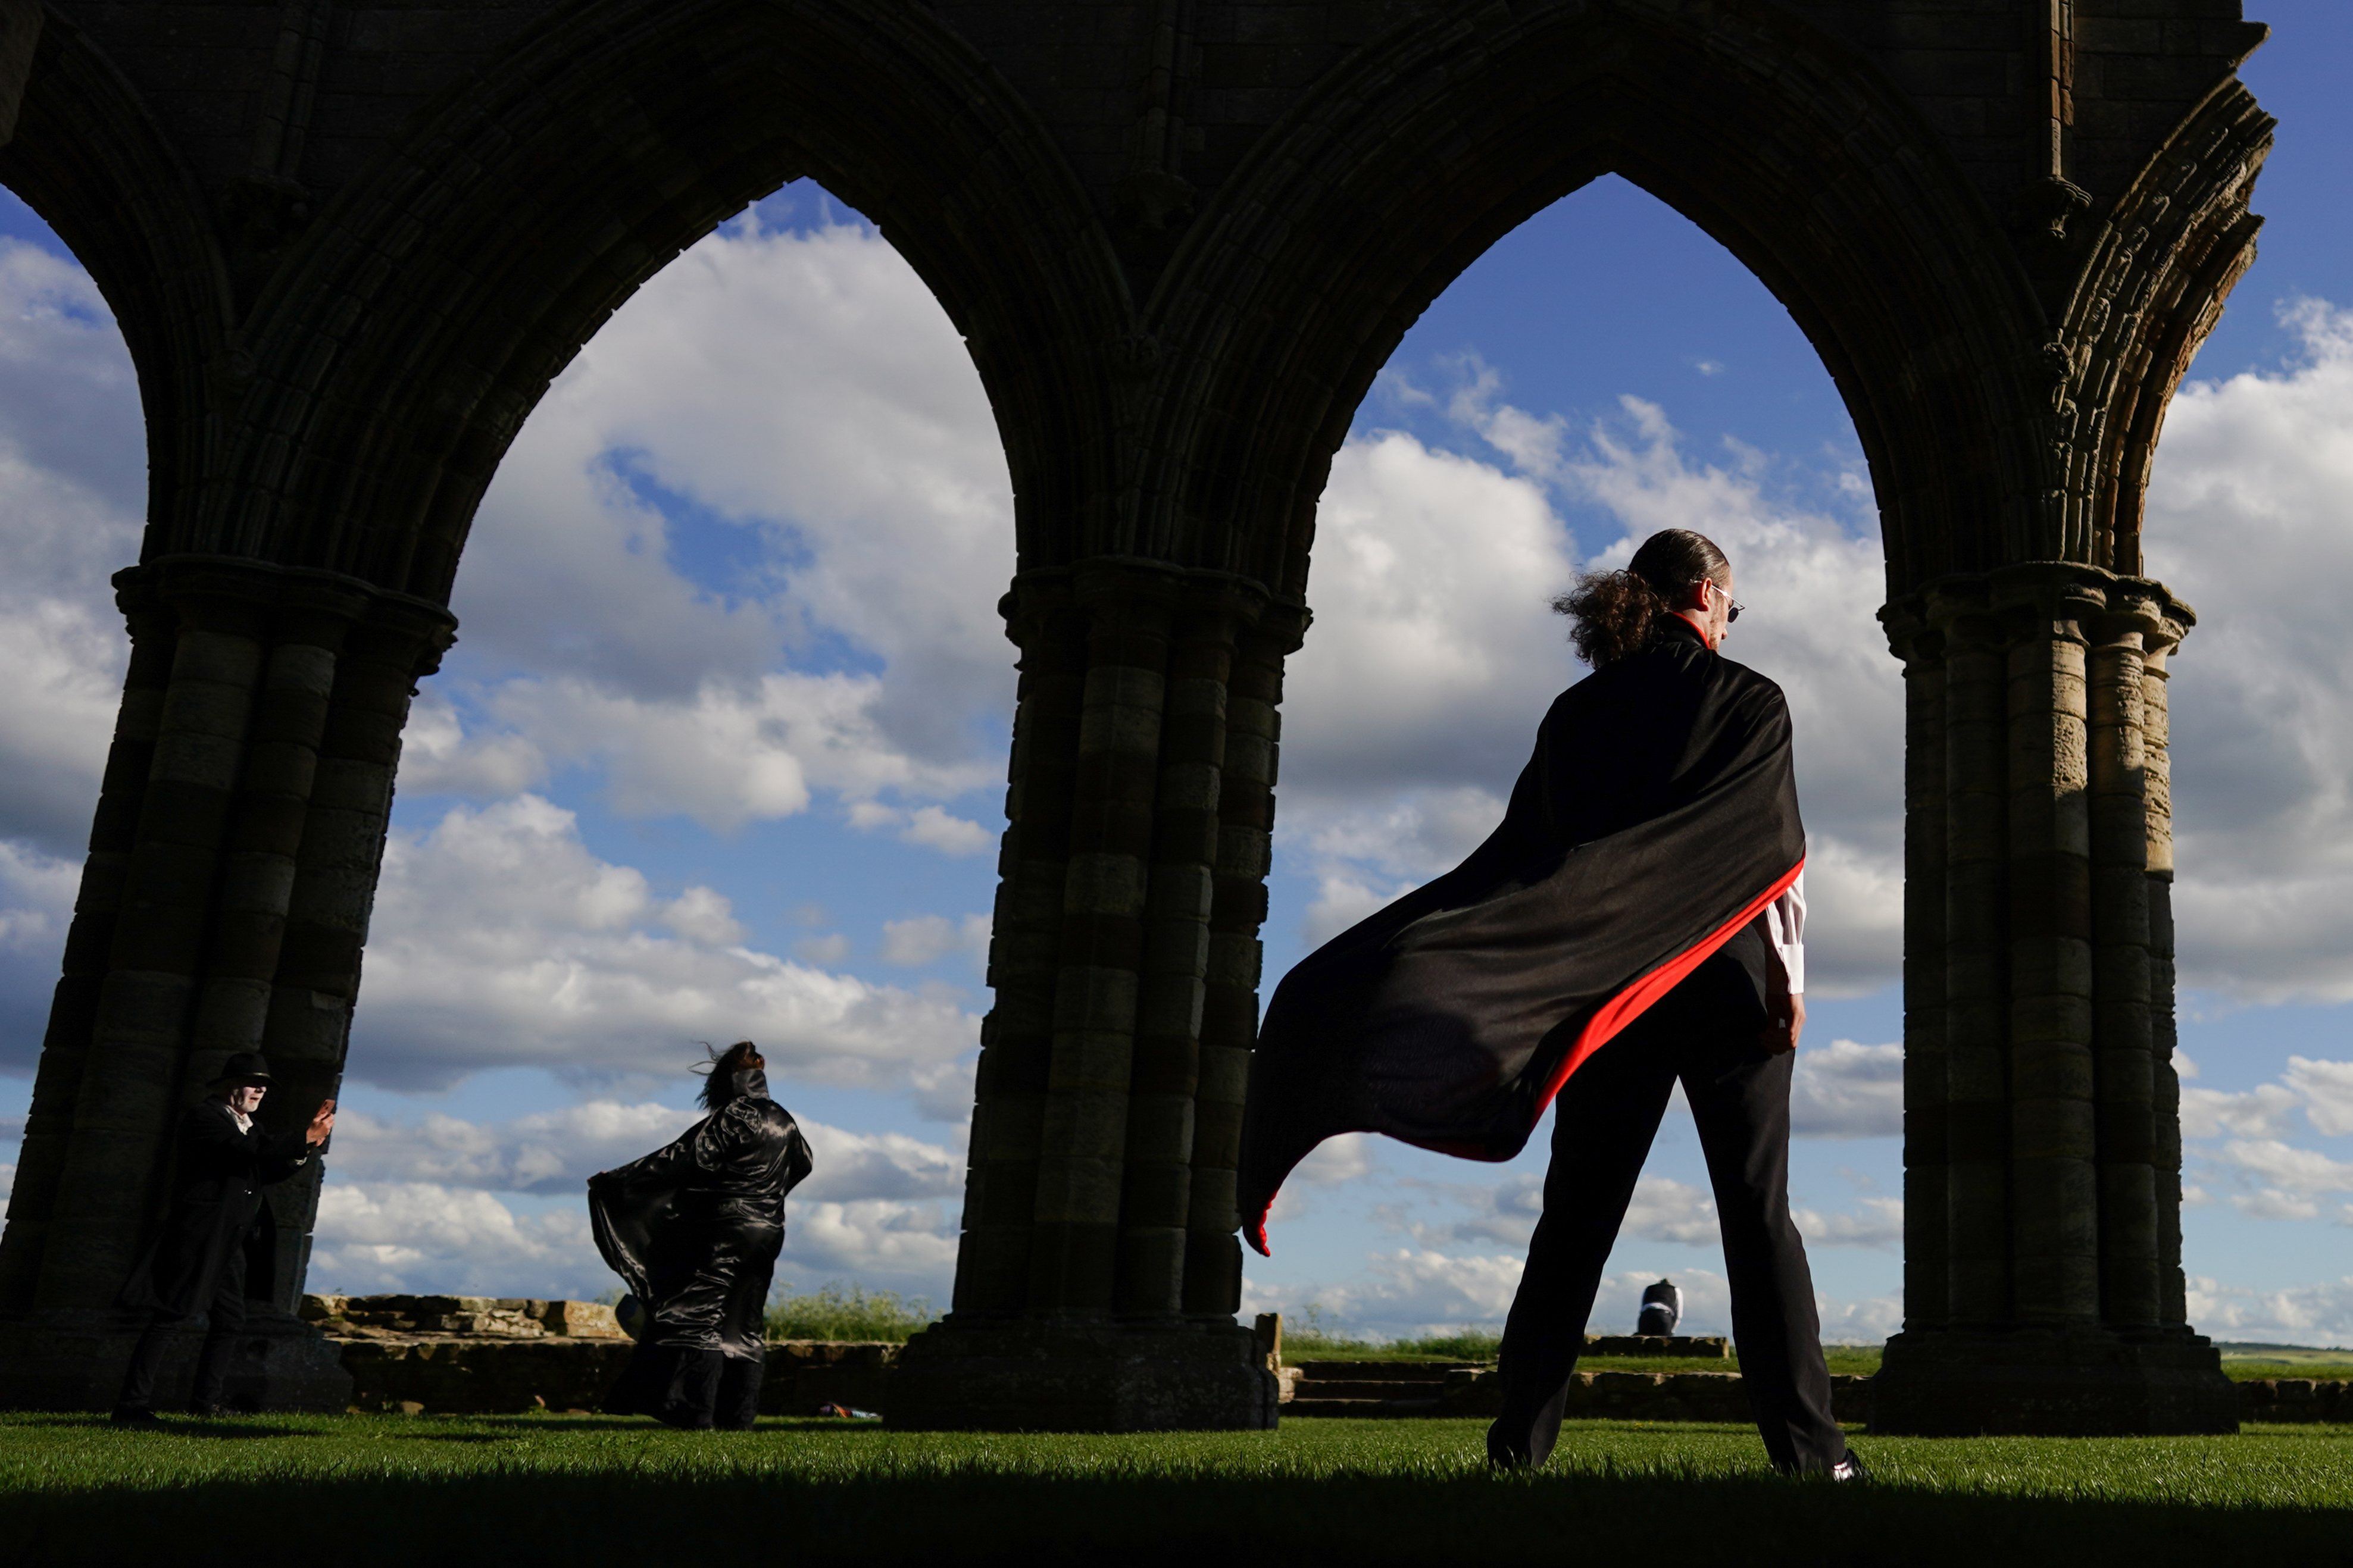 People Dressed As Vampires Attend A Guinness World Record Attempt At Whitby Abbey